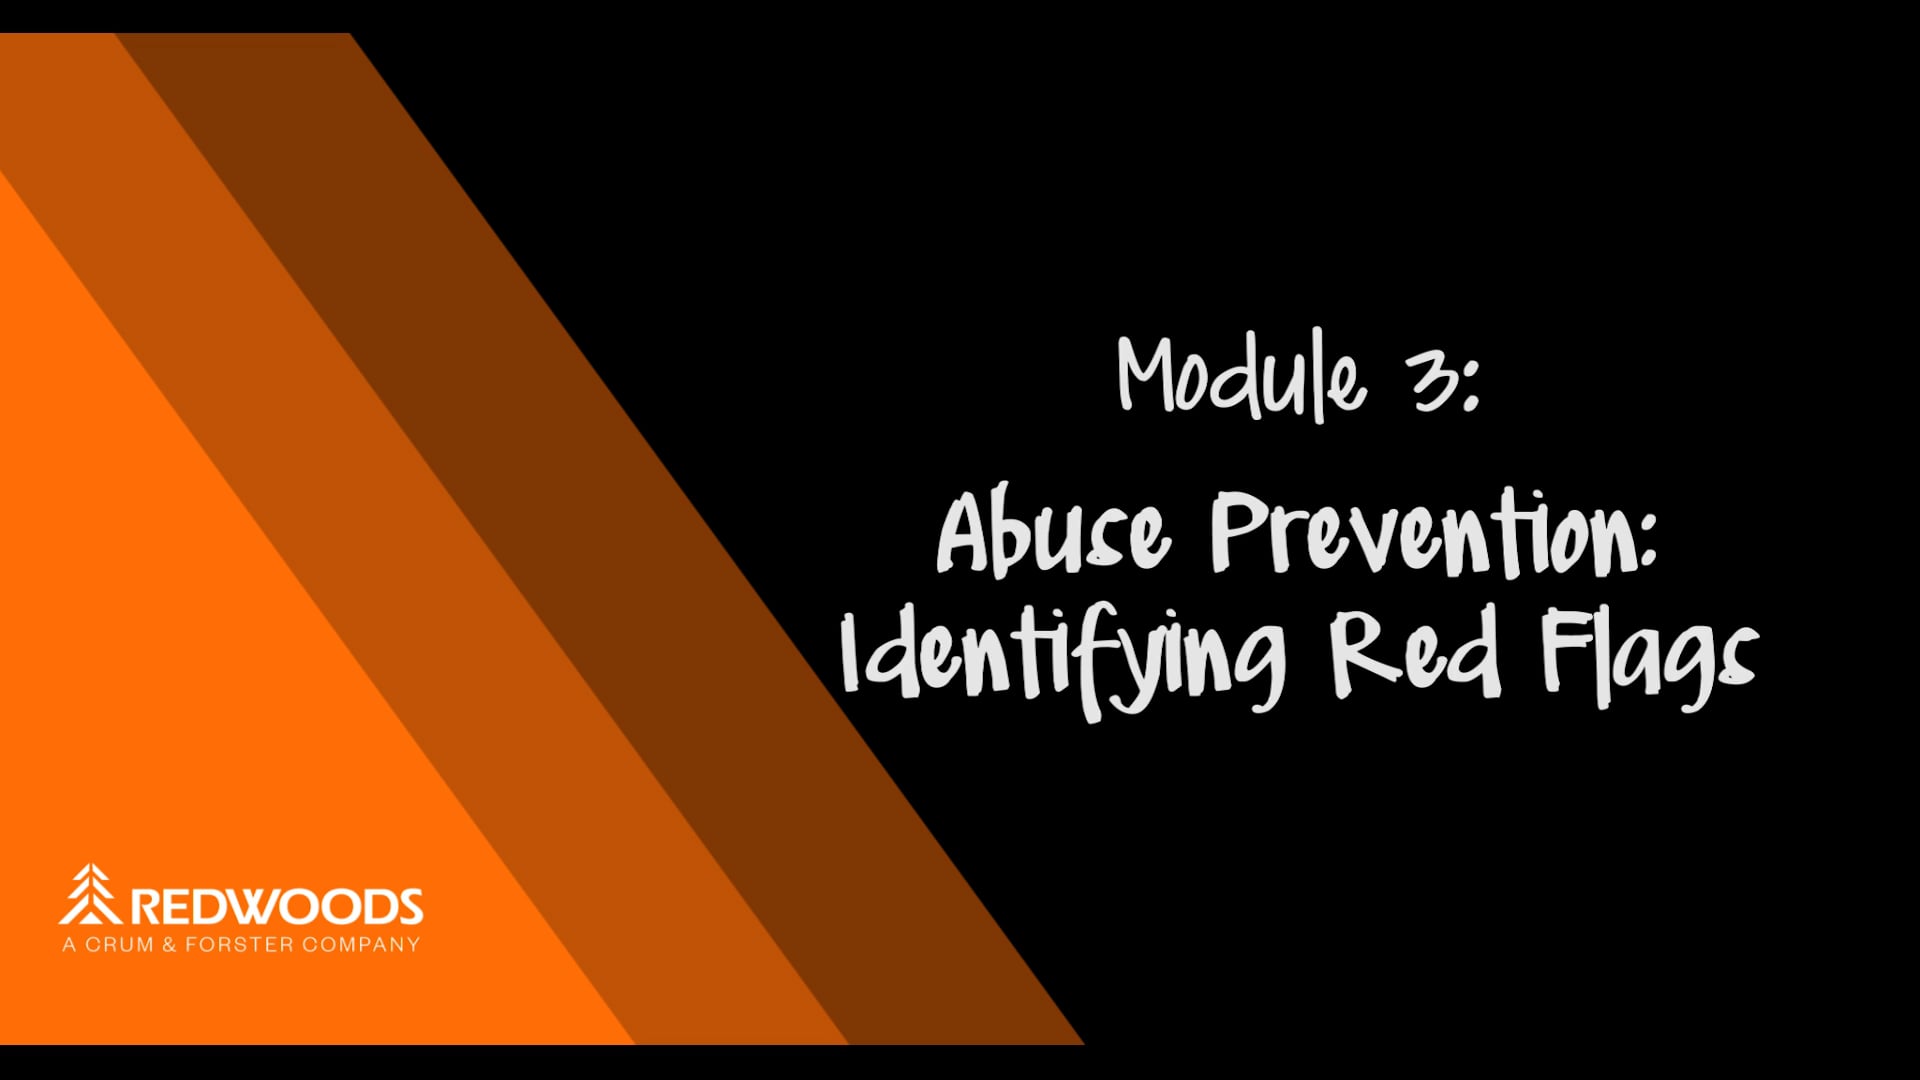 Module 3: Abuse Prevention: Identifying Red Flags